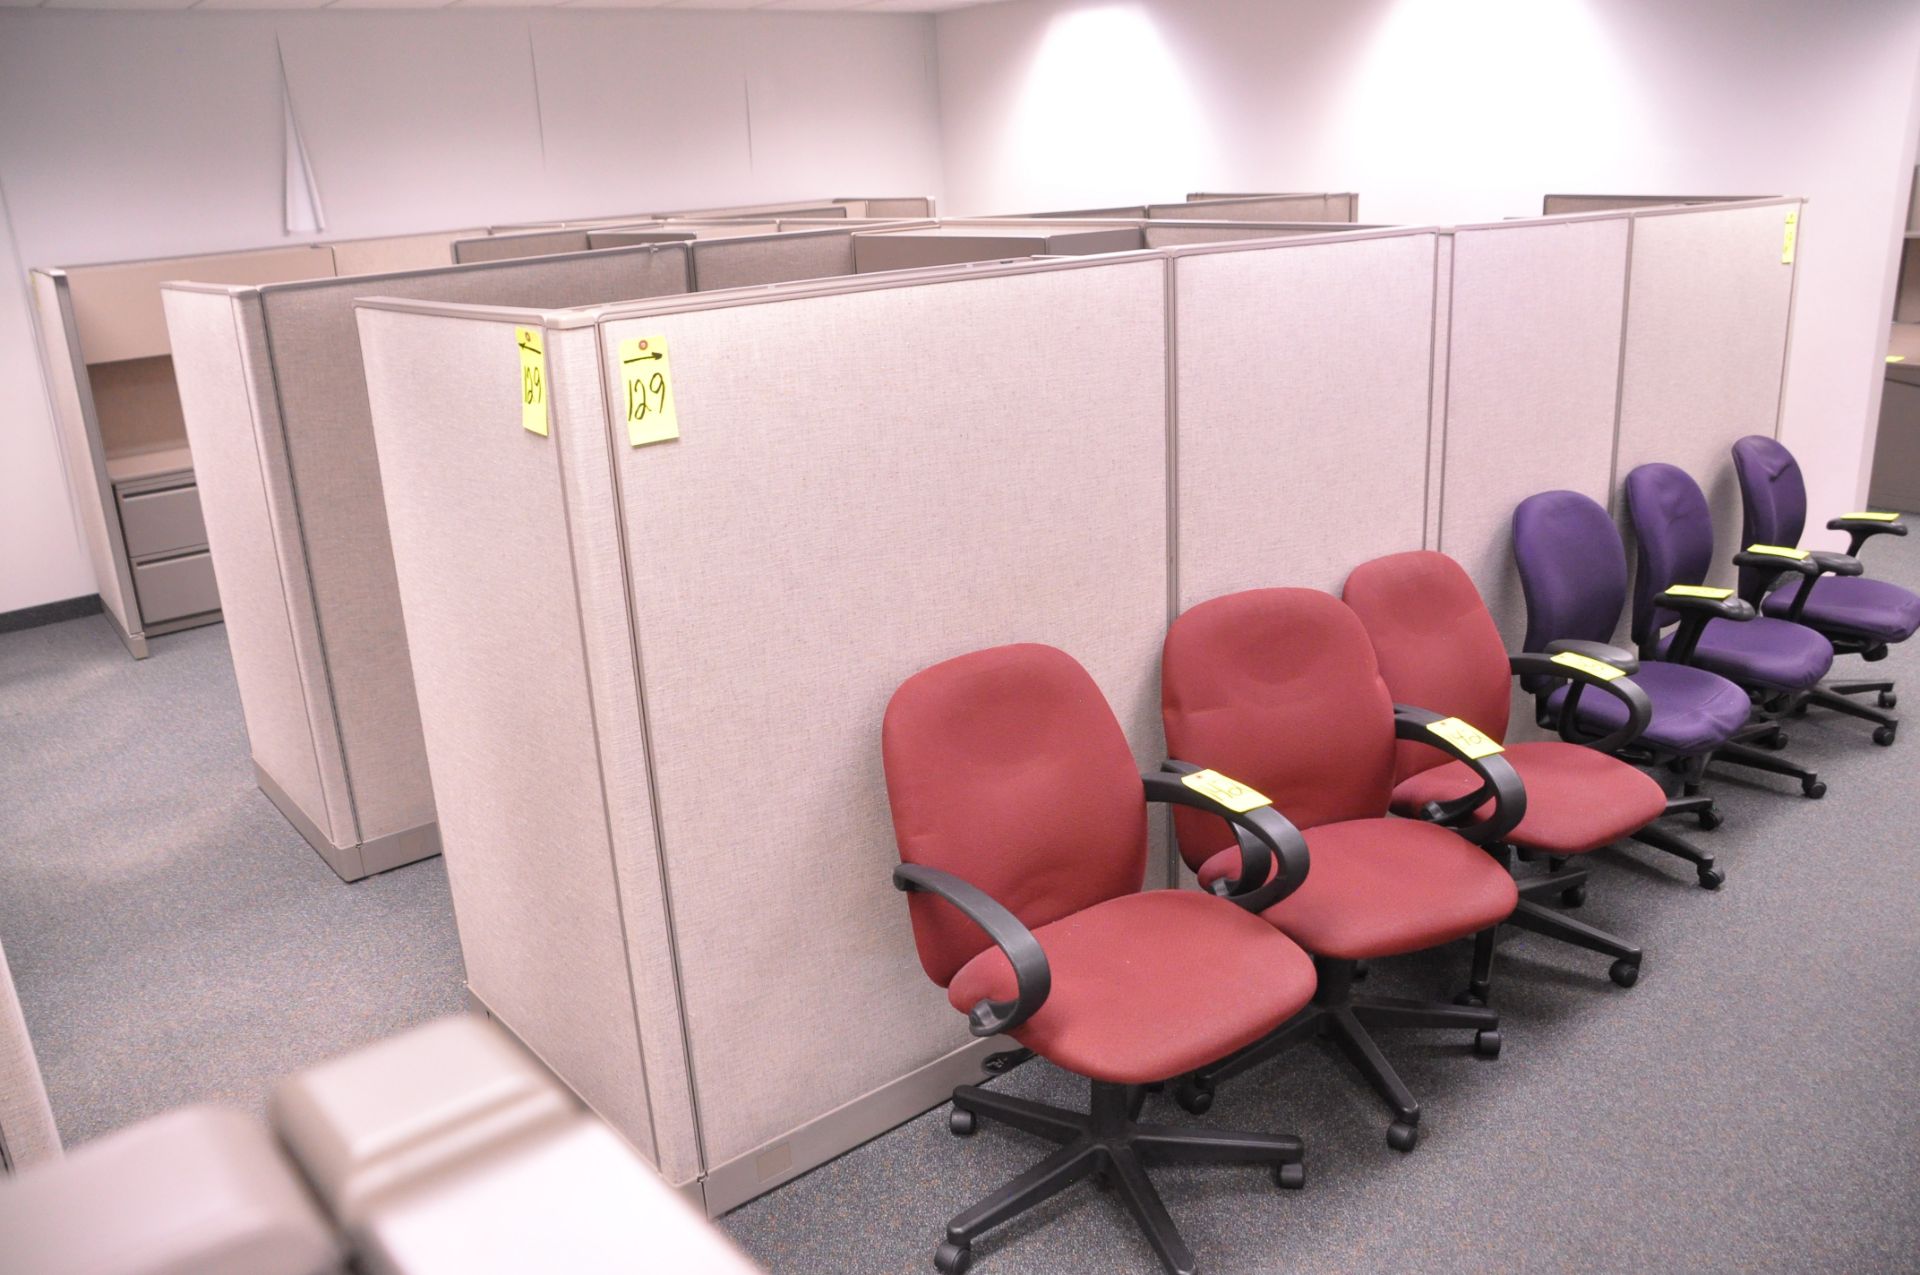 Lot-(1) 6-Station Cubicle Partition Work System with Overhead Cabinets, (No Chairs), (Located 2nd